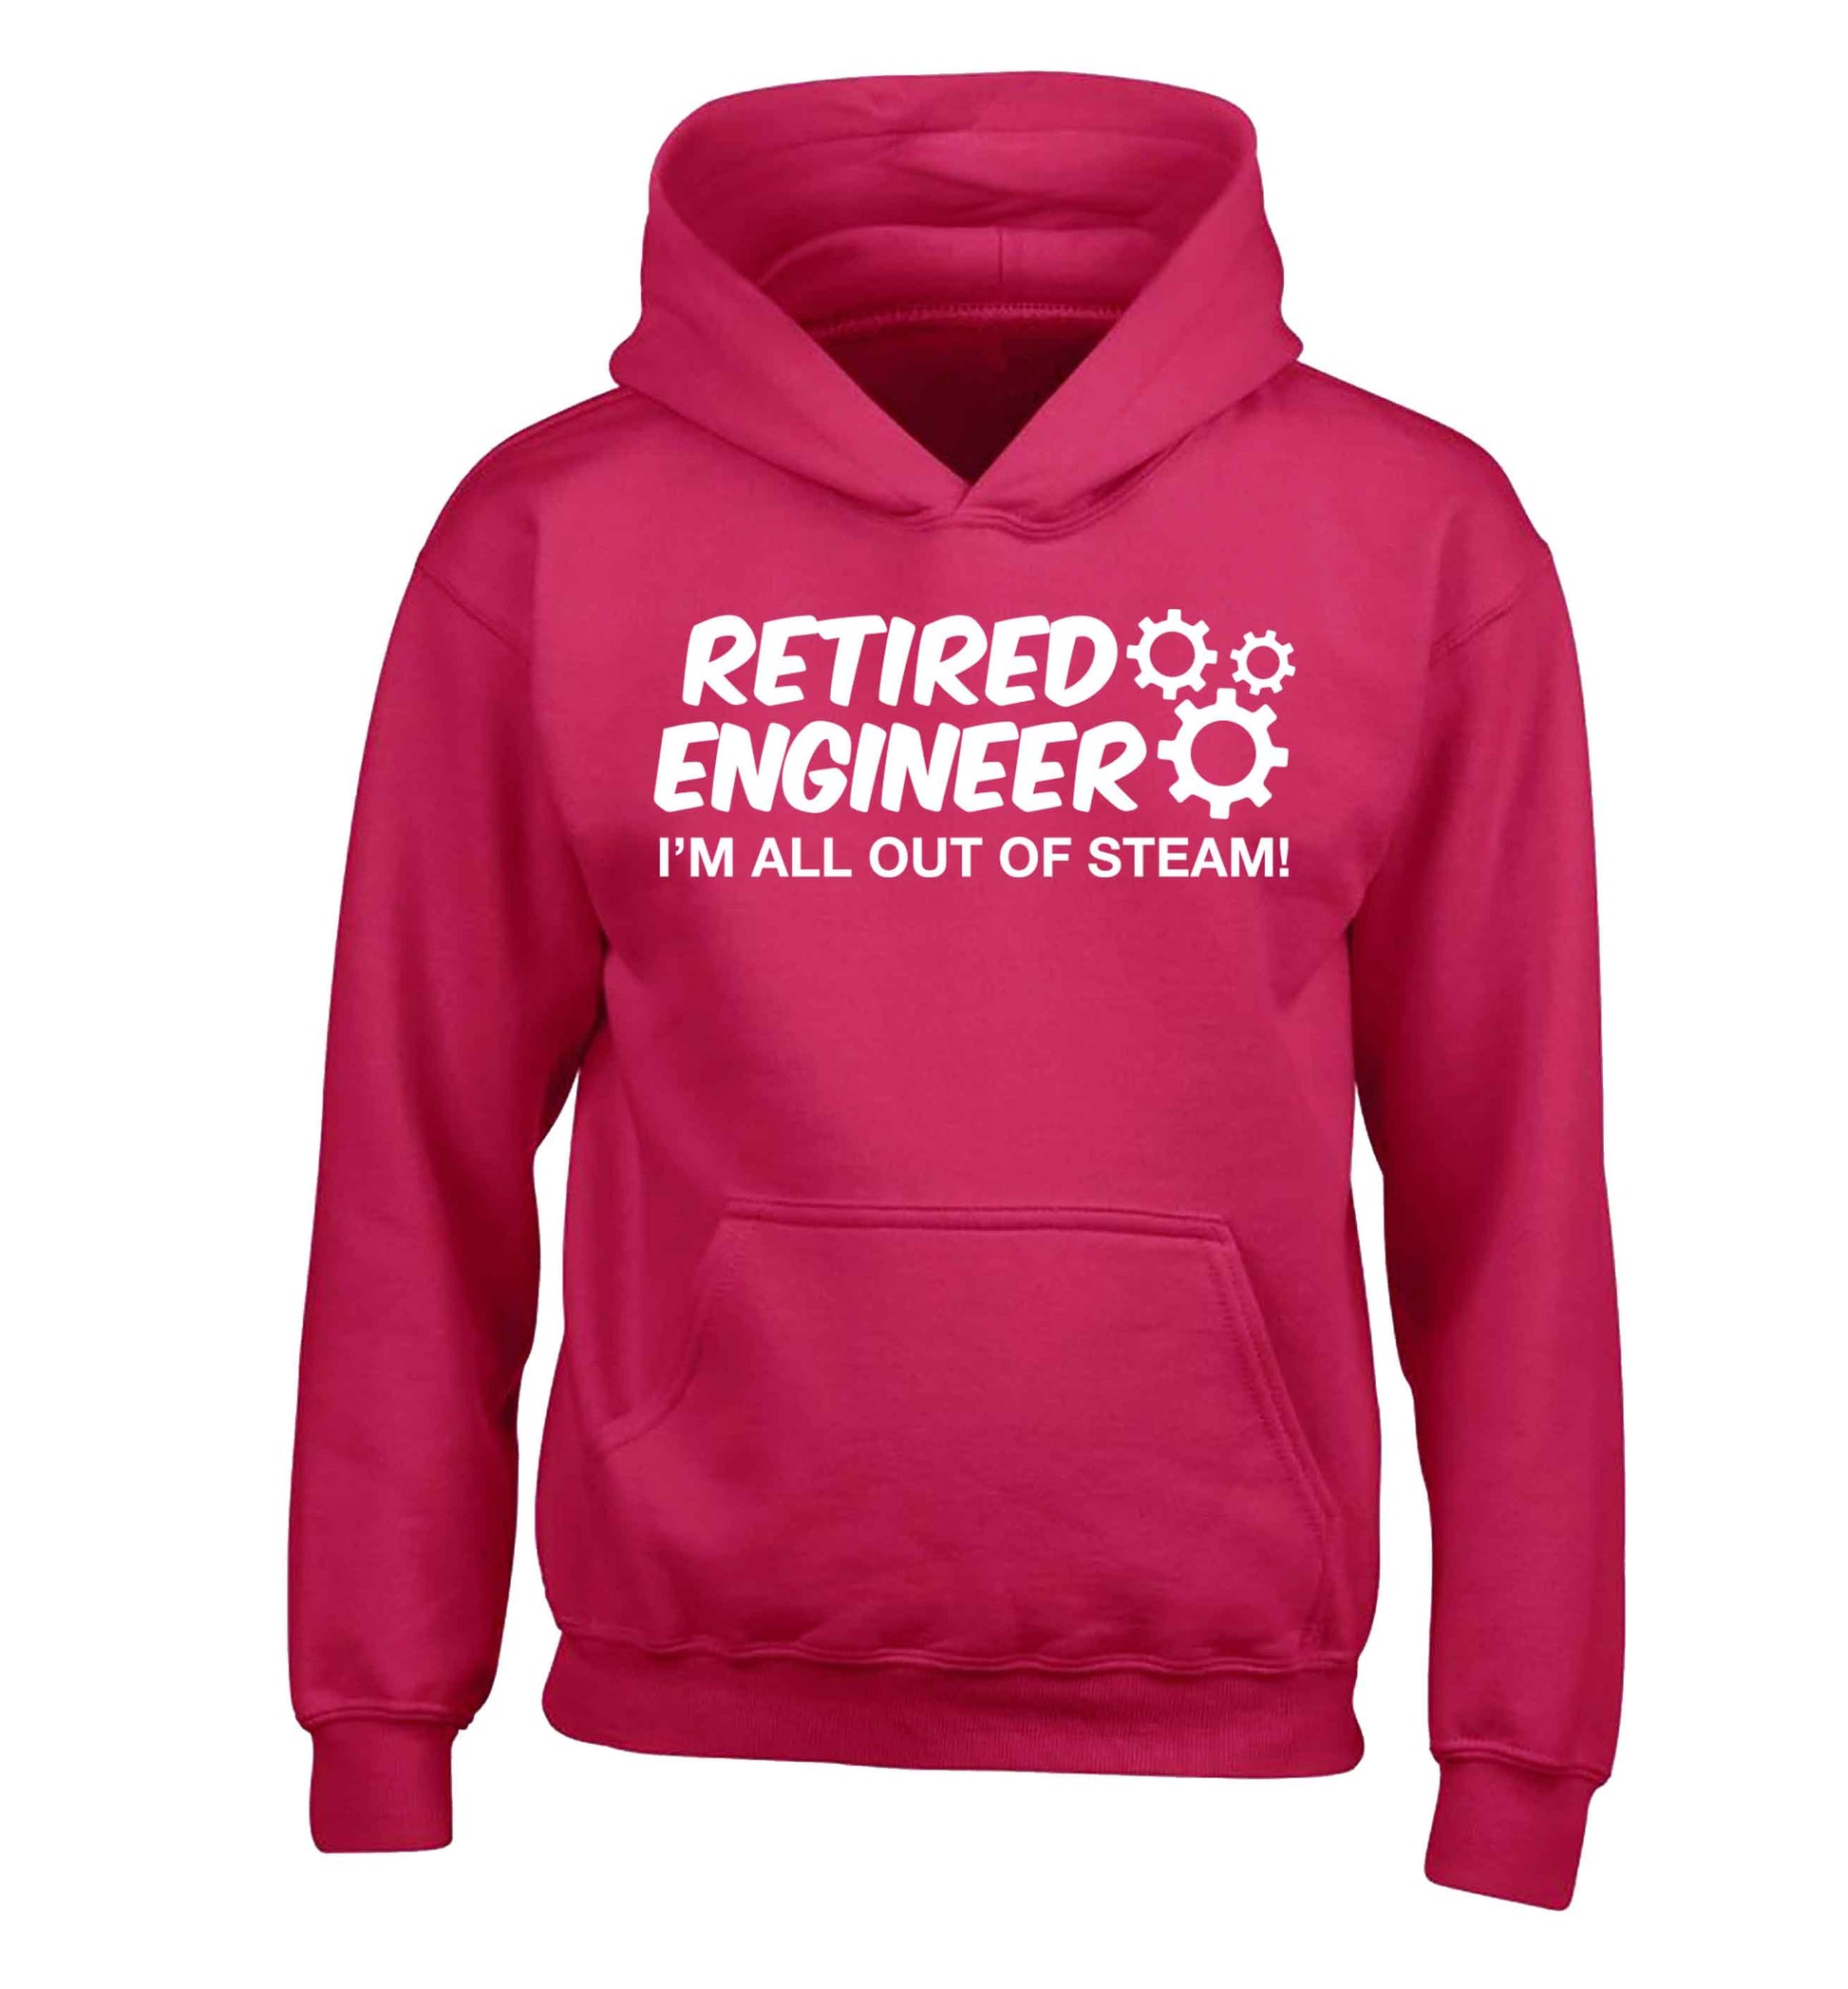 Retired engineer I'm all out of steam children's pink hoodie 12-13 Years